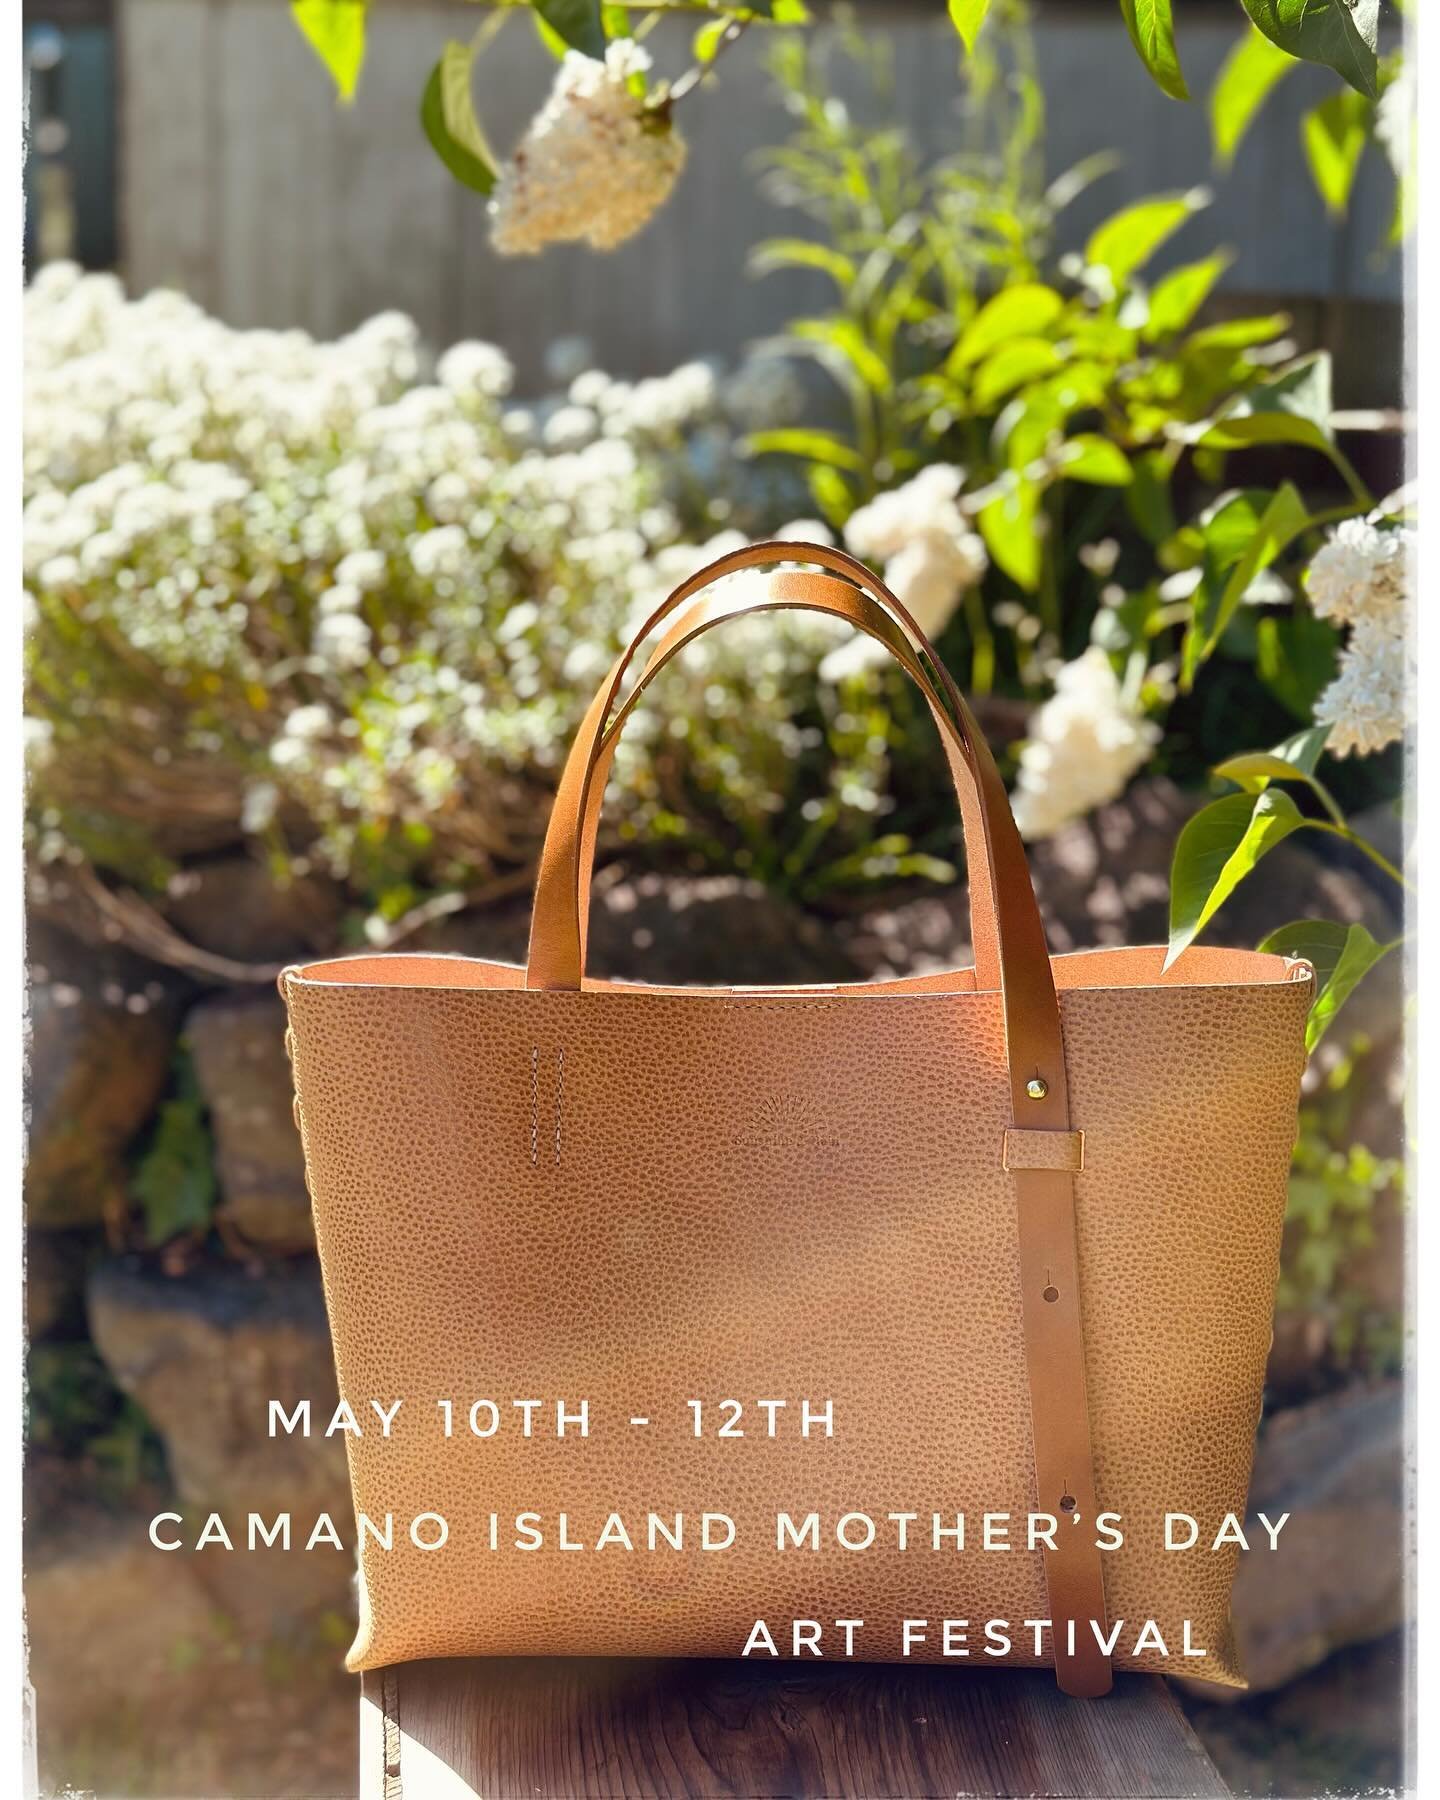 I&rsquo;ll be up north on Camano Island in a week! Hope you can make the drive and spend some time at this charming art festival.  The weather looks perfect! ☀️
Show hours are 10am-5pm, Friday-Sunday, May 10th-12th at Terry&rsquo;s Corner. 💐

#caman